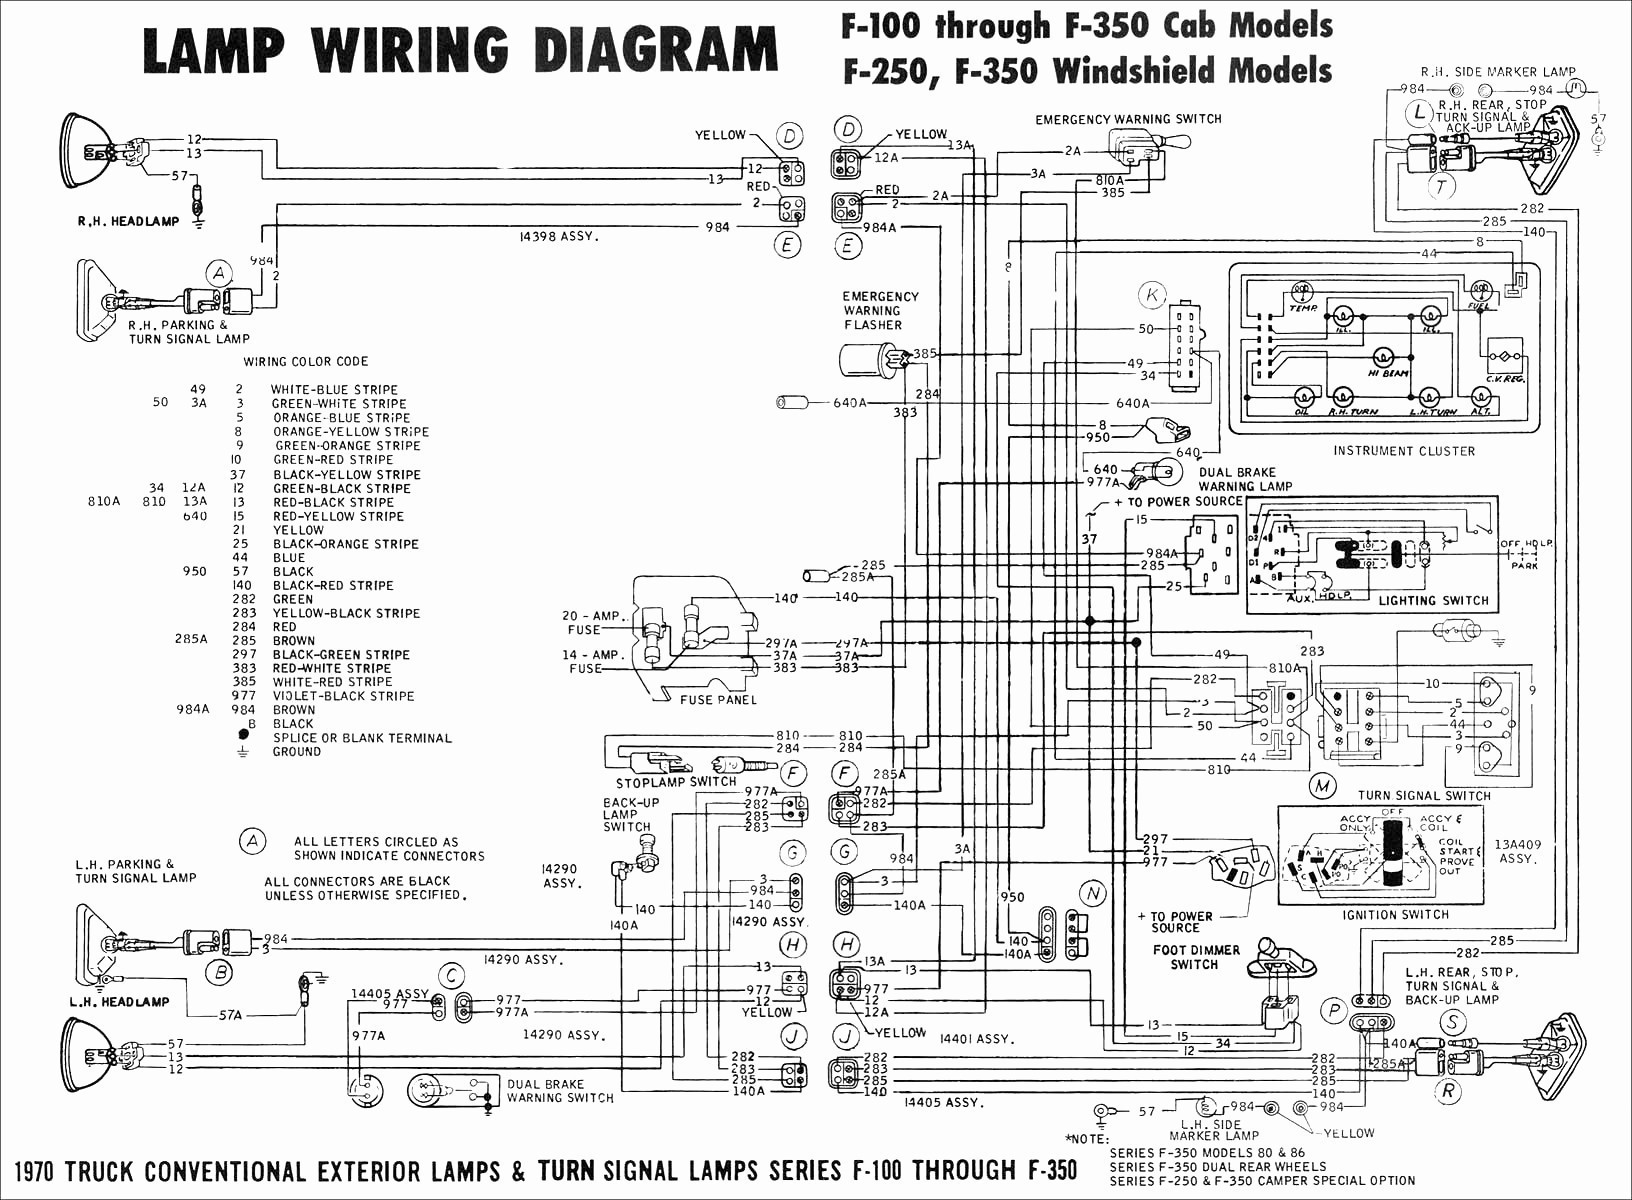 Ford Engine Parts Diagram 2008 ford F150 Parts Diagram Wiring Diagram Paper